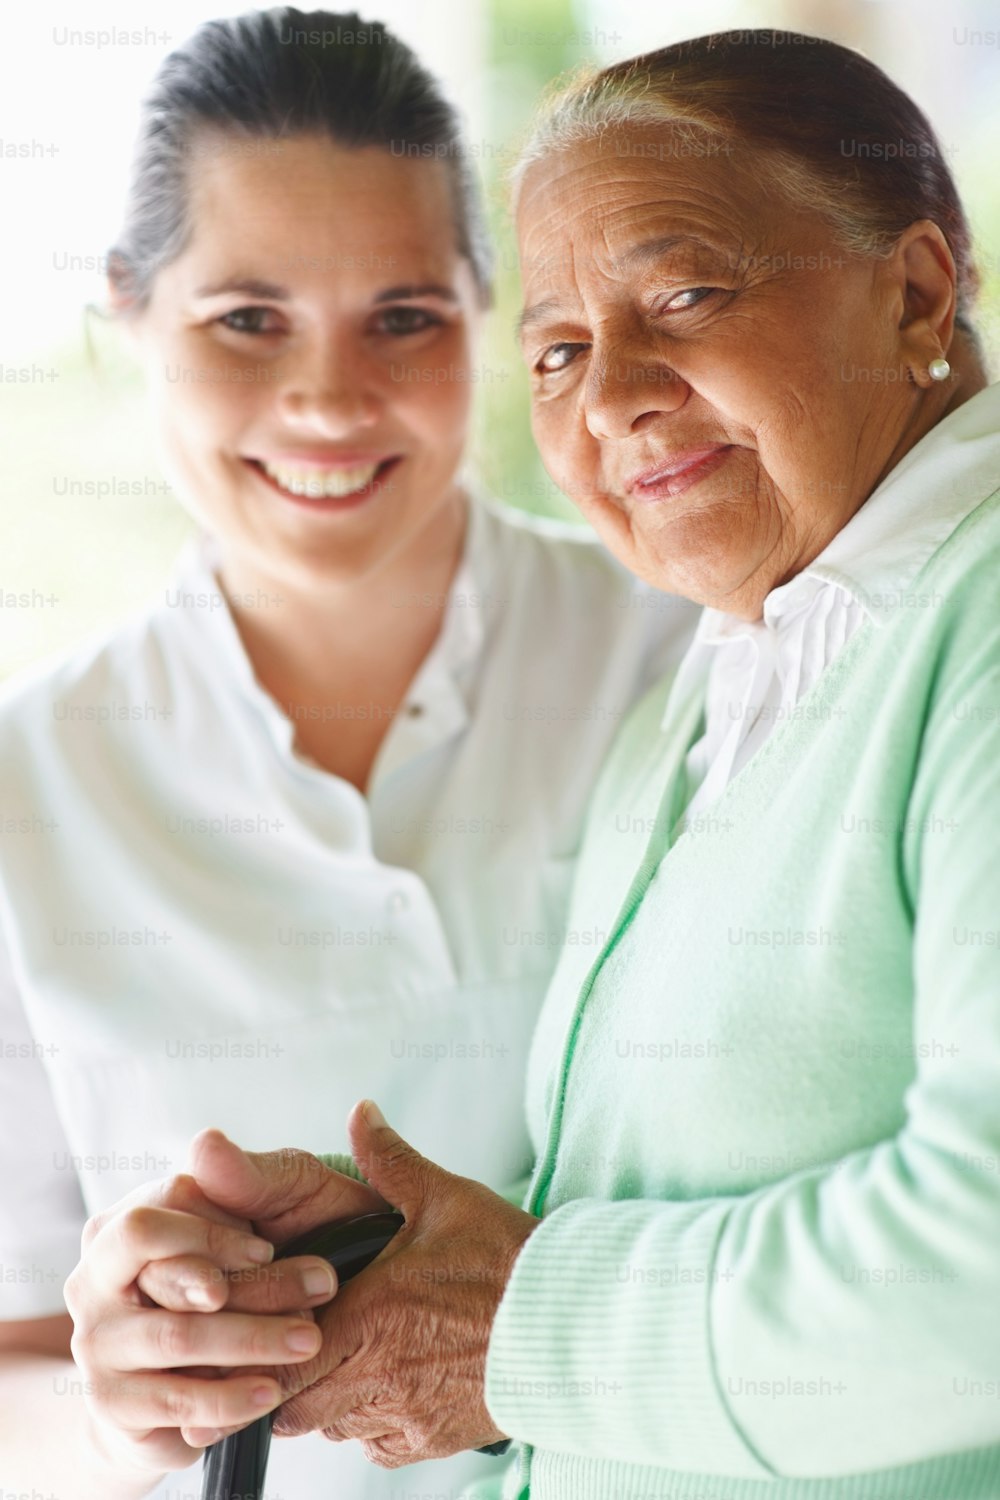 Elderly woman smiling with a nurse